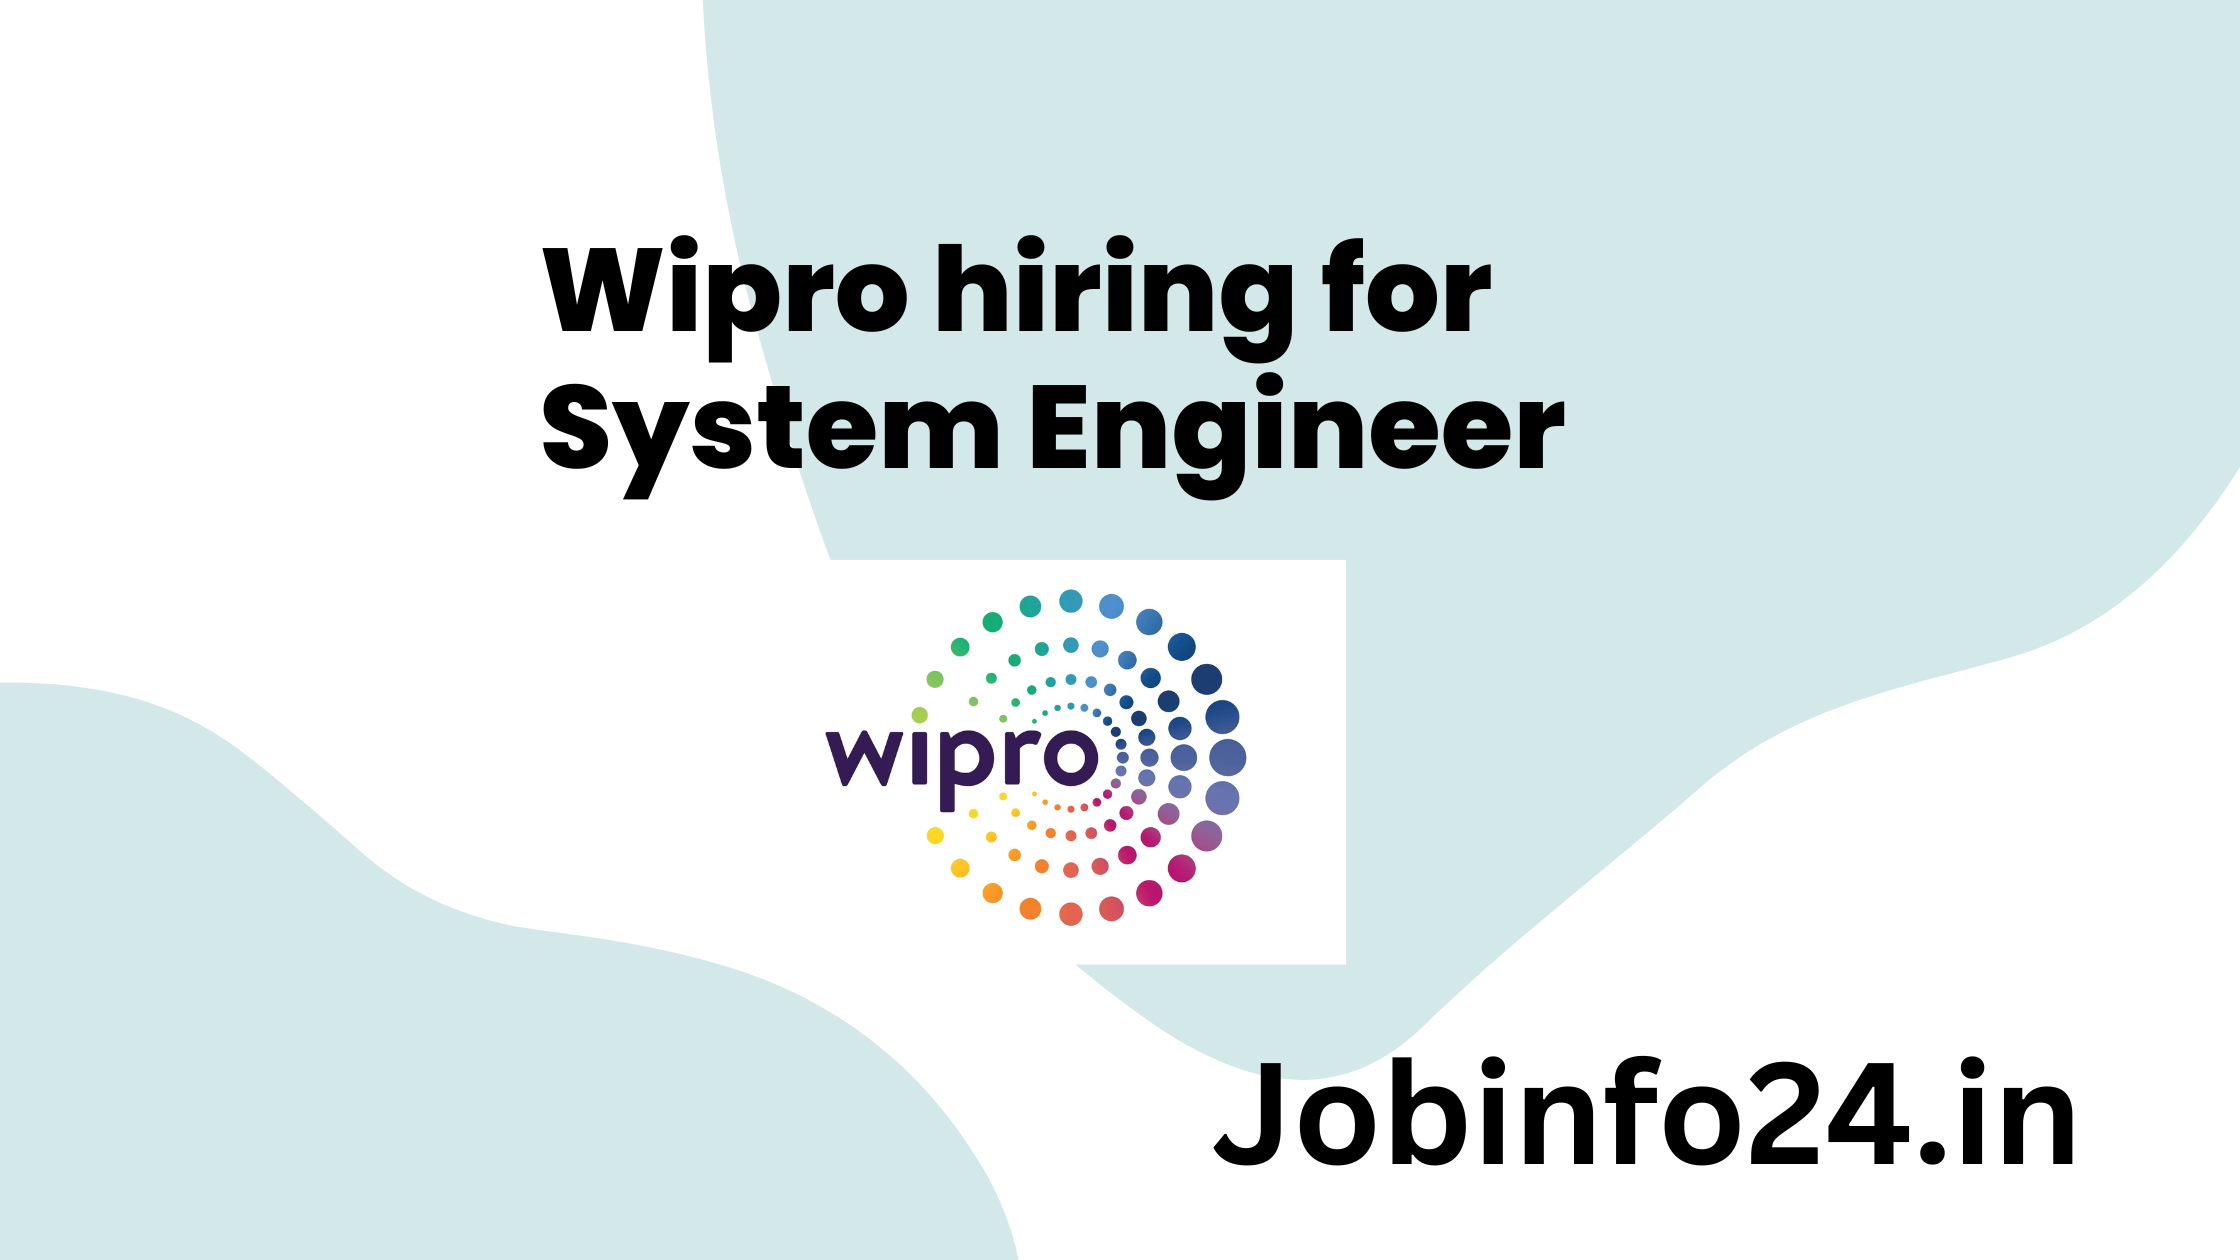 Wipro hiring for System Engineer